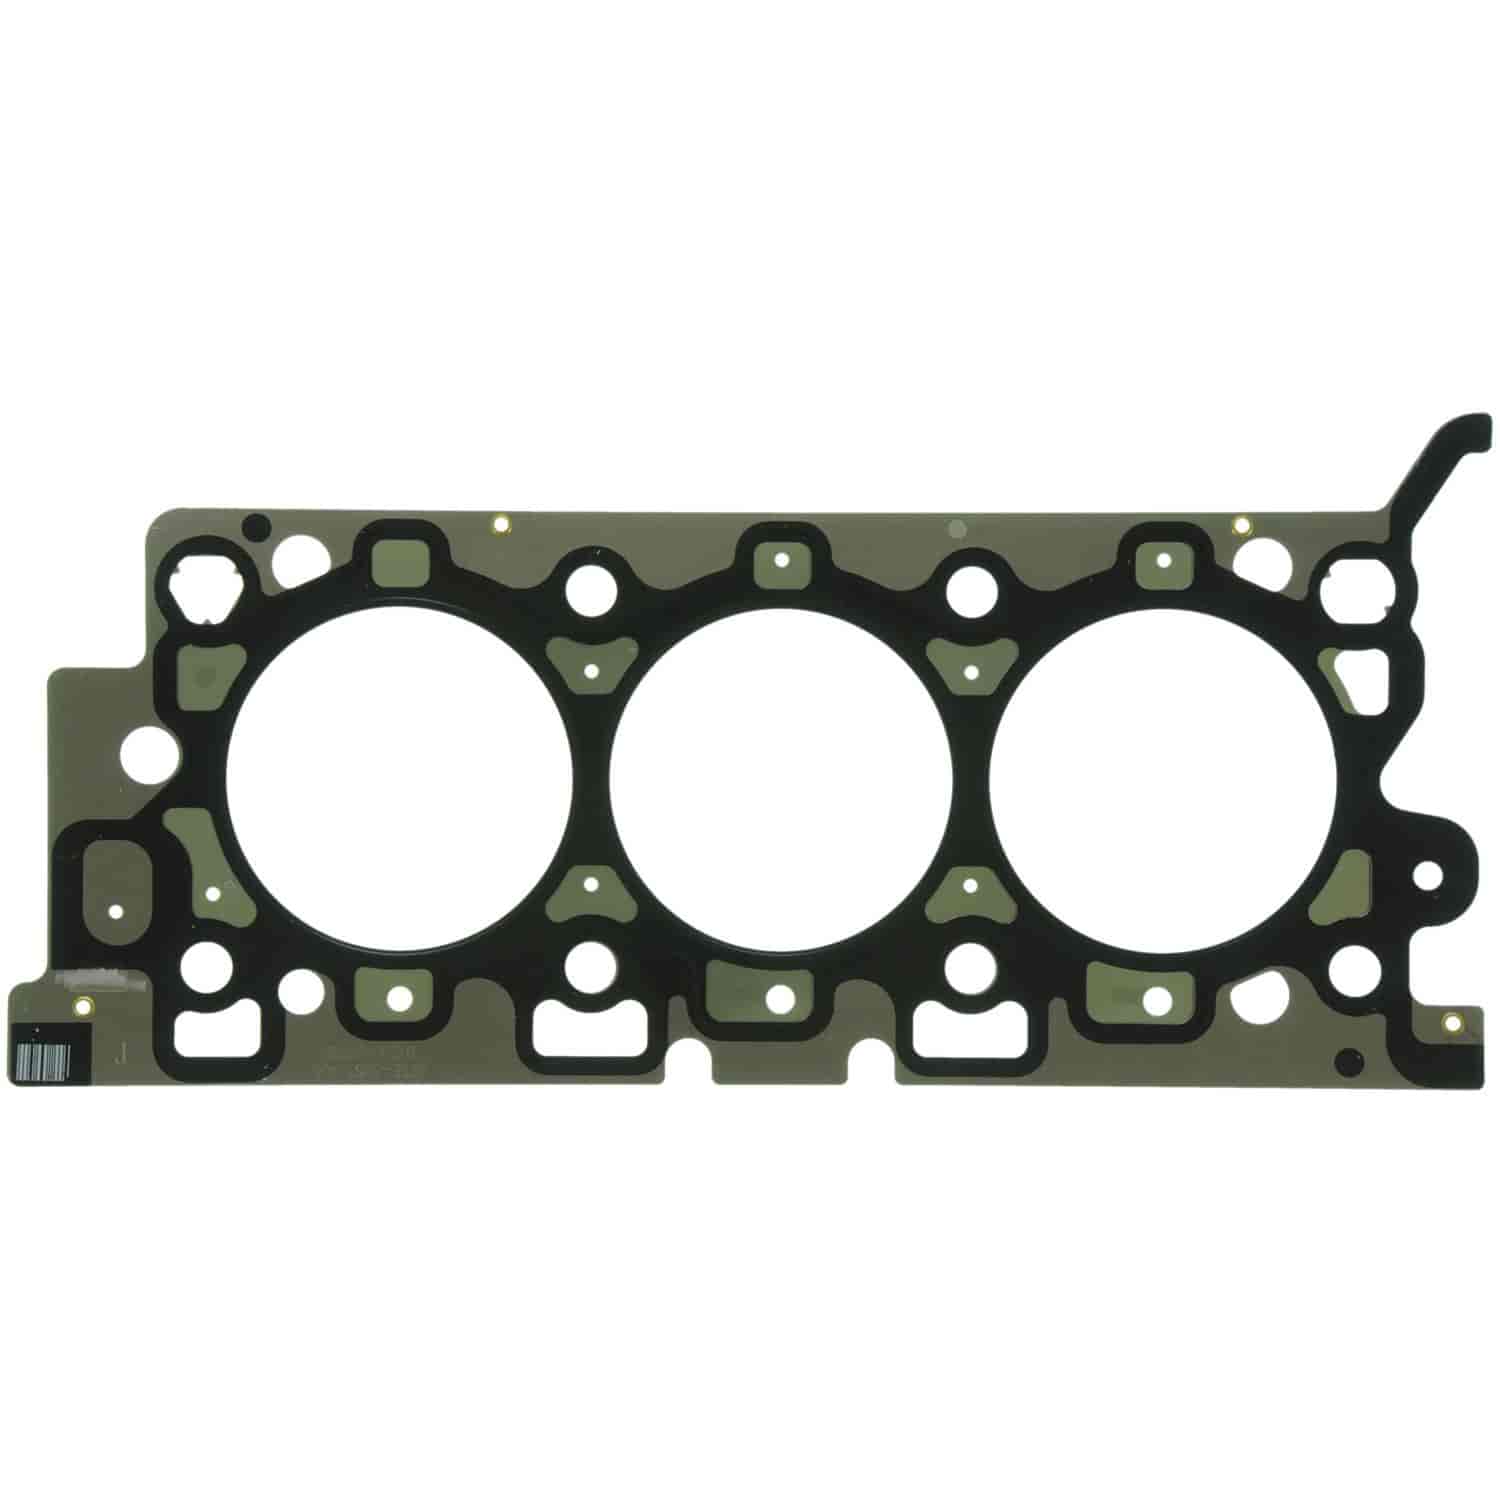 Cylinder Head Gasket Right Ford 3.0L V6 DOHC Duratec Taurus & Sable 2004-2006 500 & Montego 2005-06.